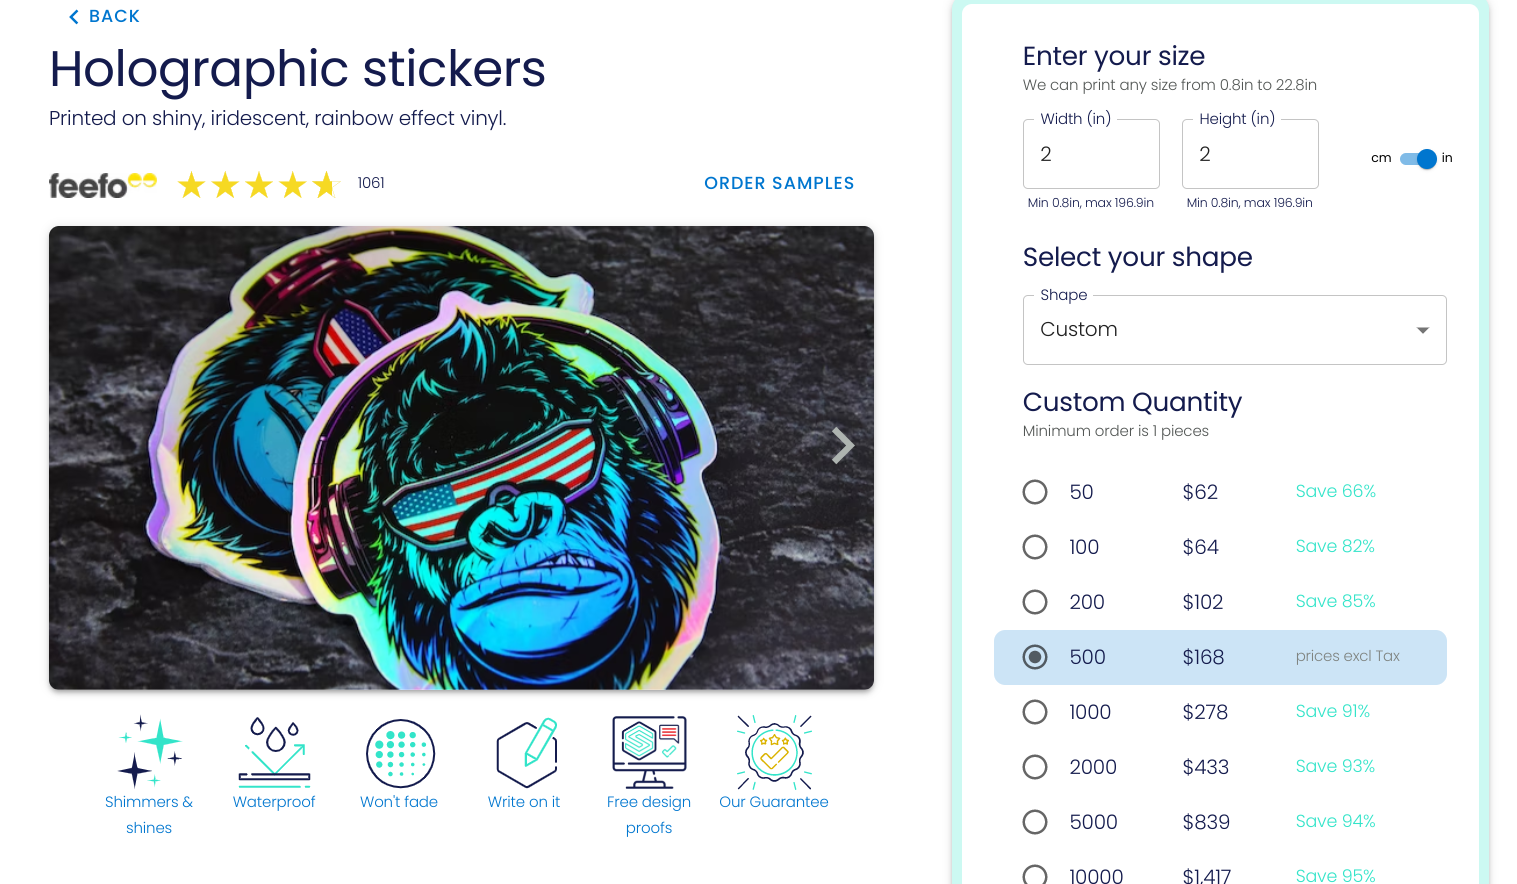 Screenshot of the holographic stickers product page to explain the ordering process